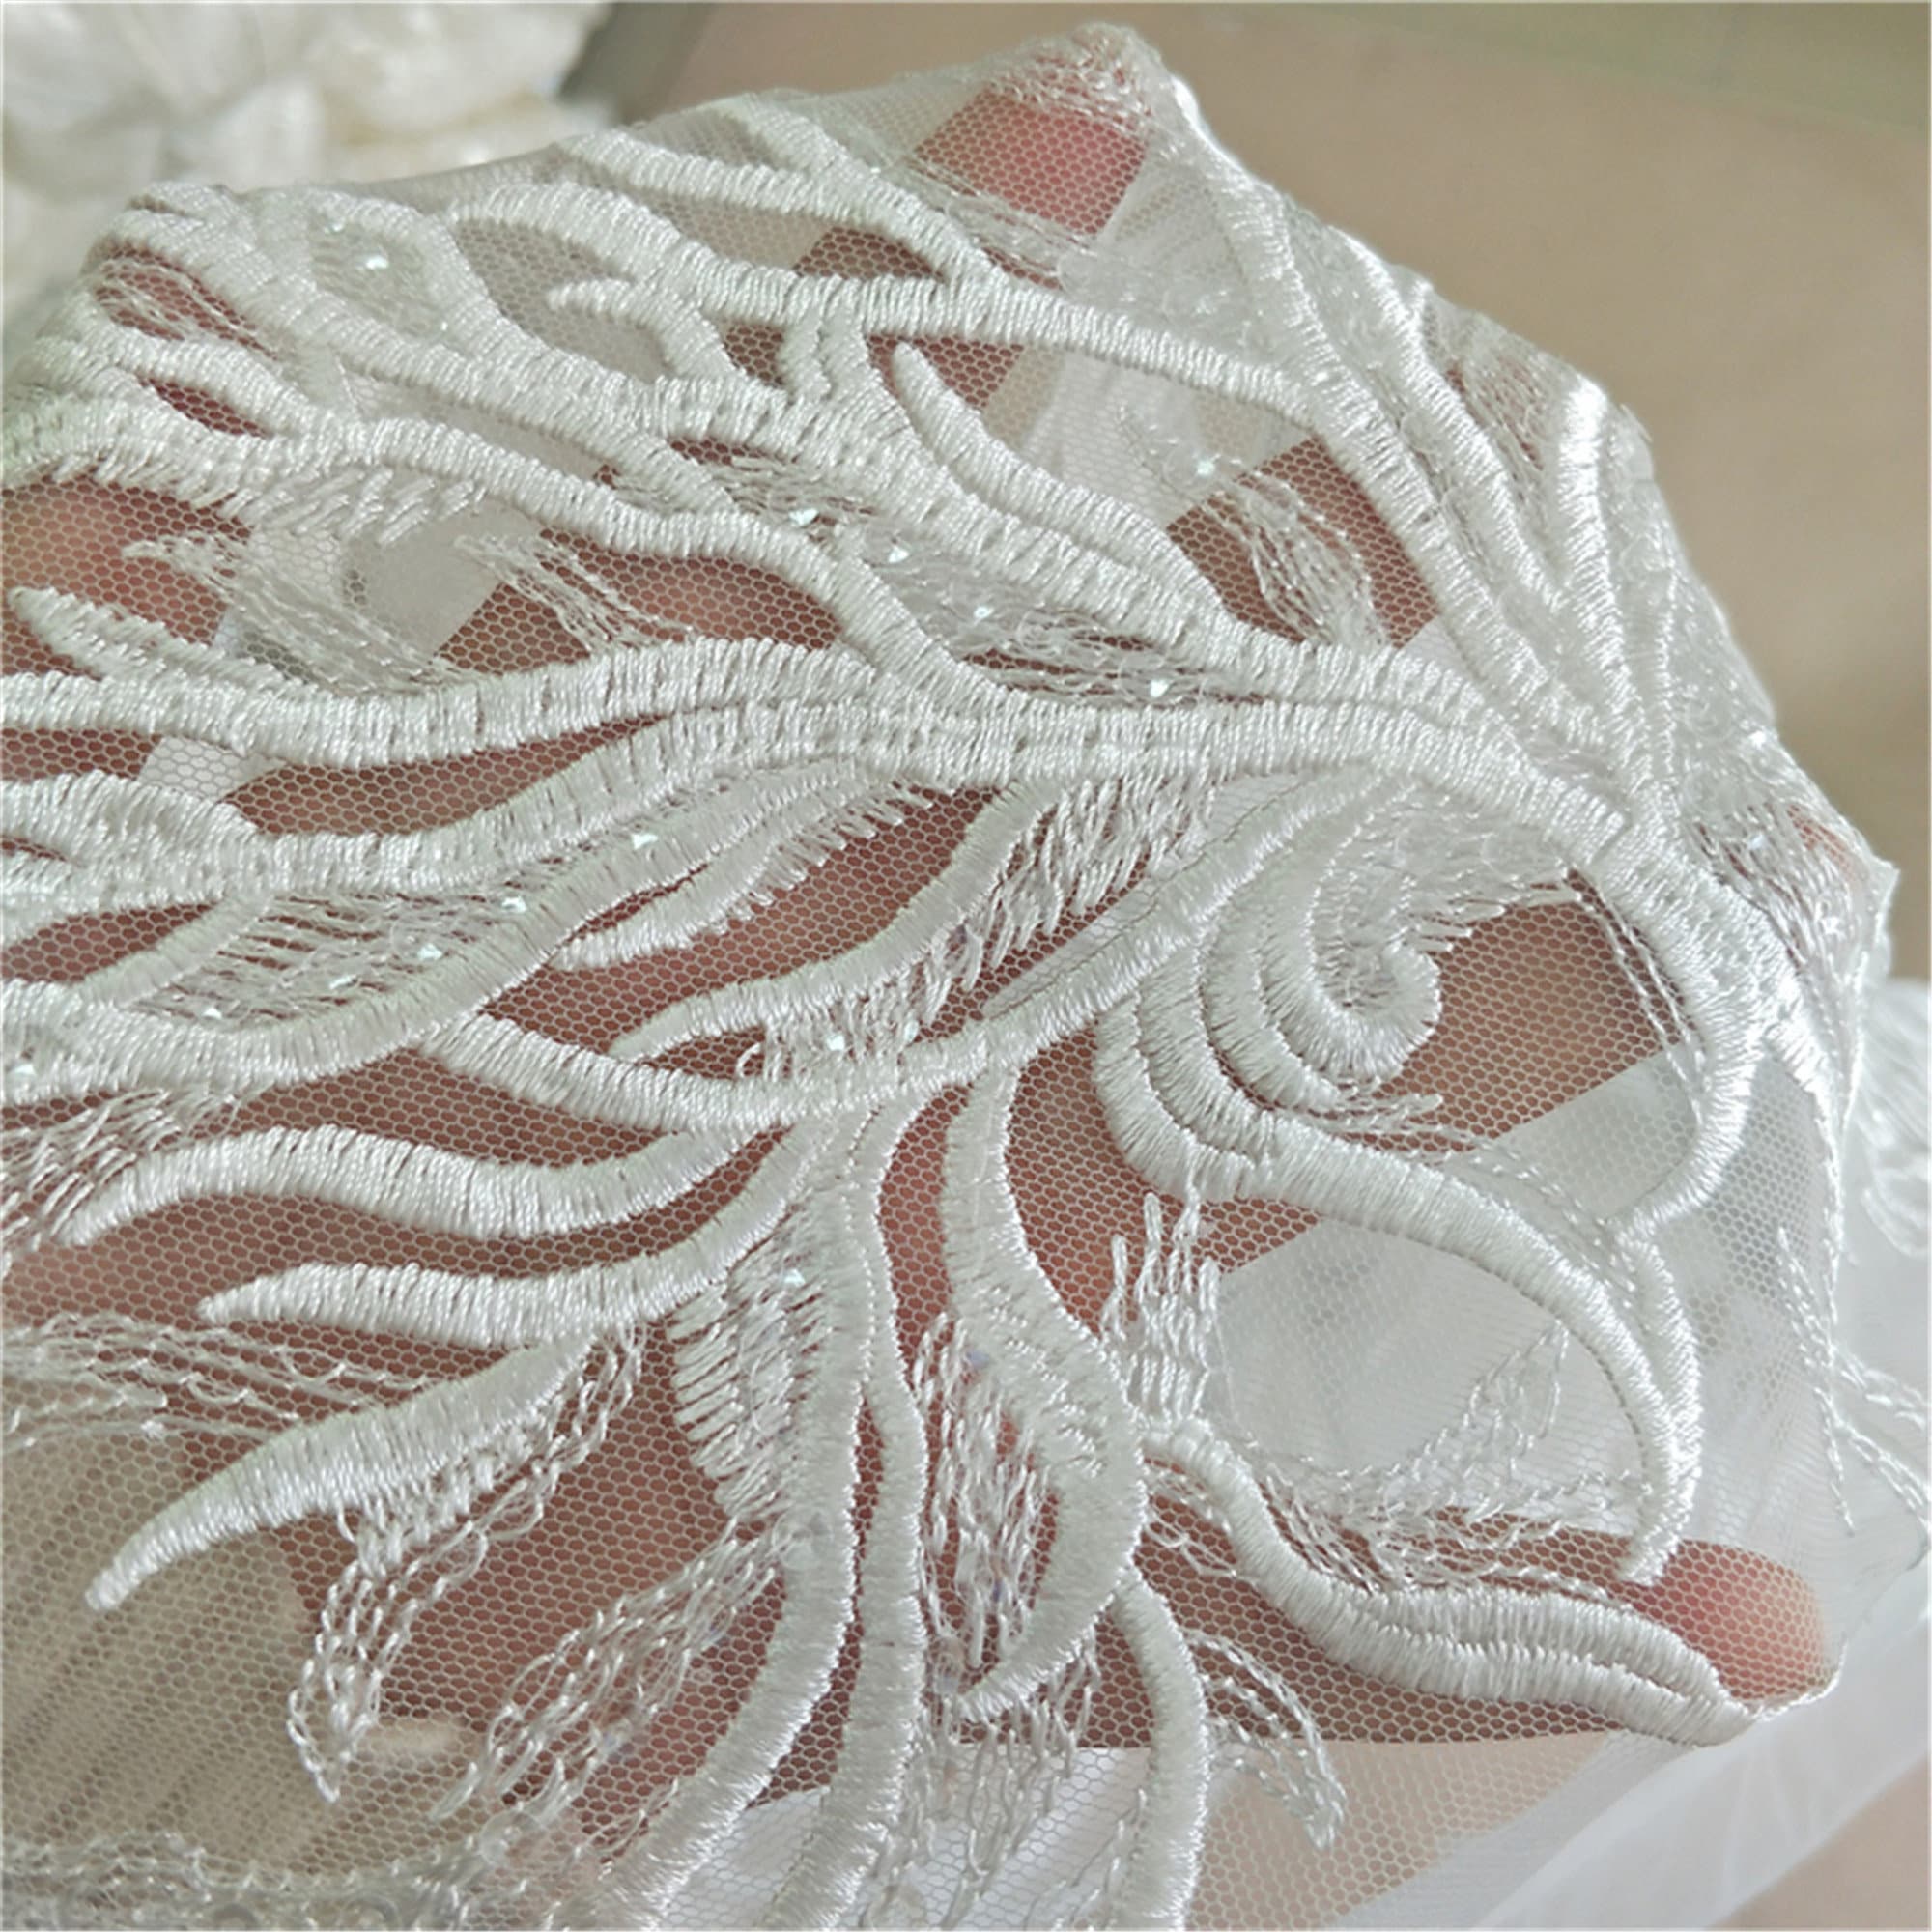 Vintage off White Sequins Lace Fabric Embroidery Flower Lace - Etsy